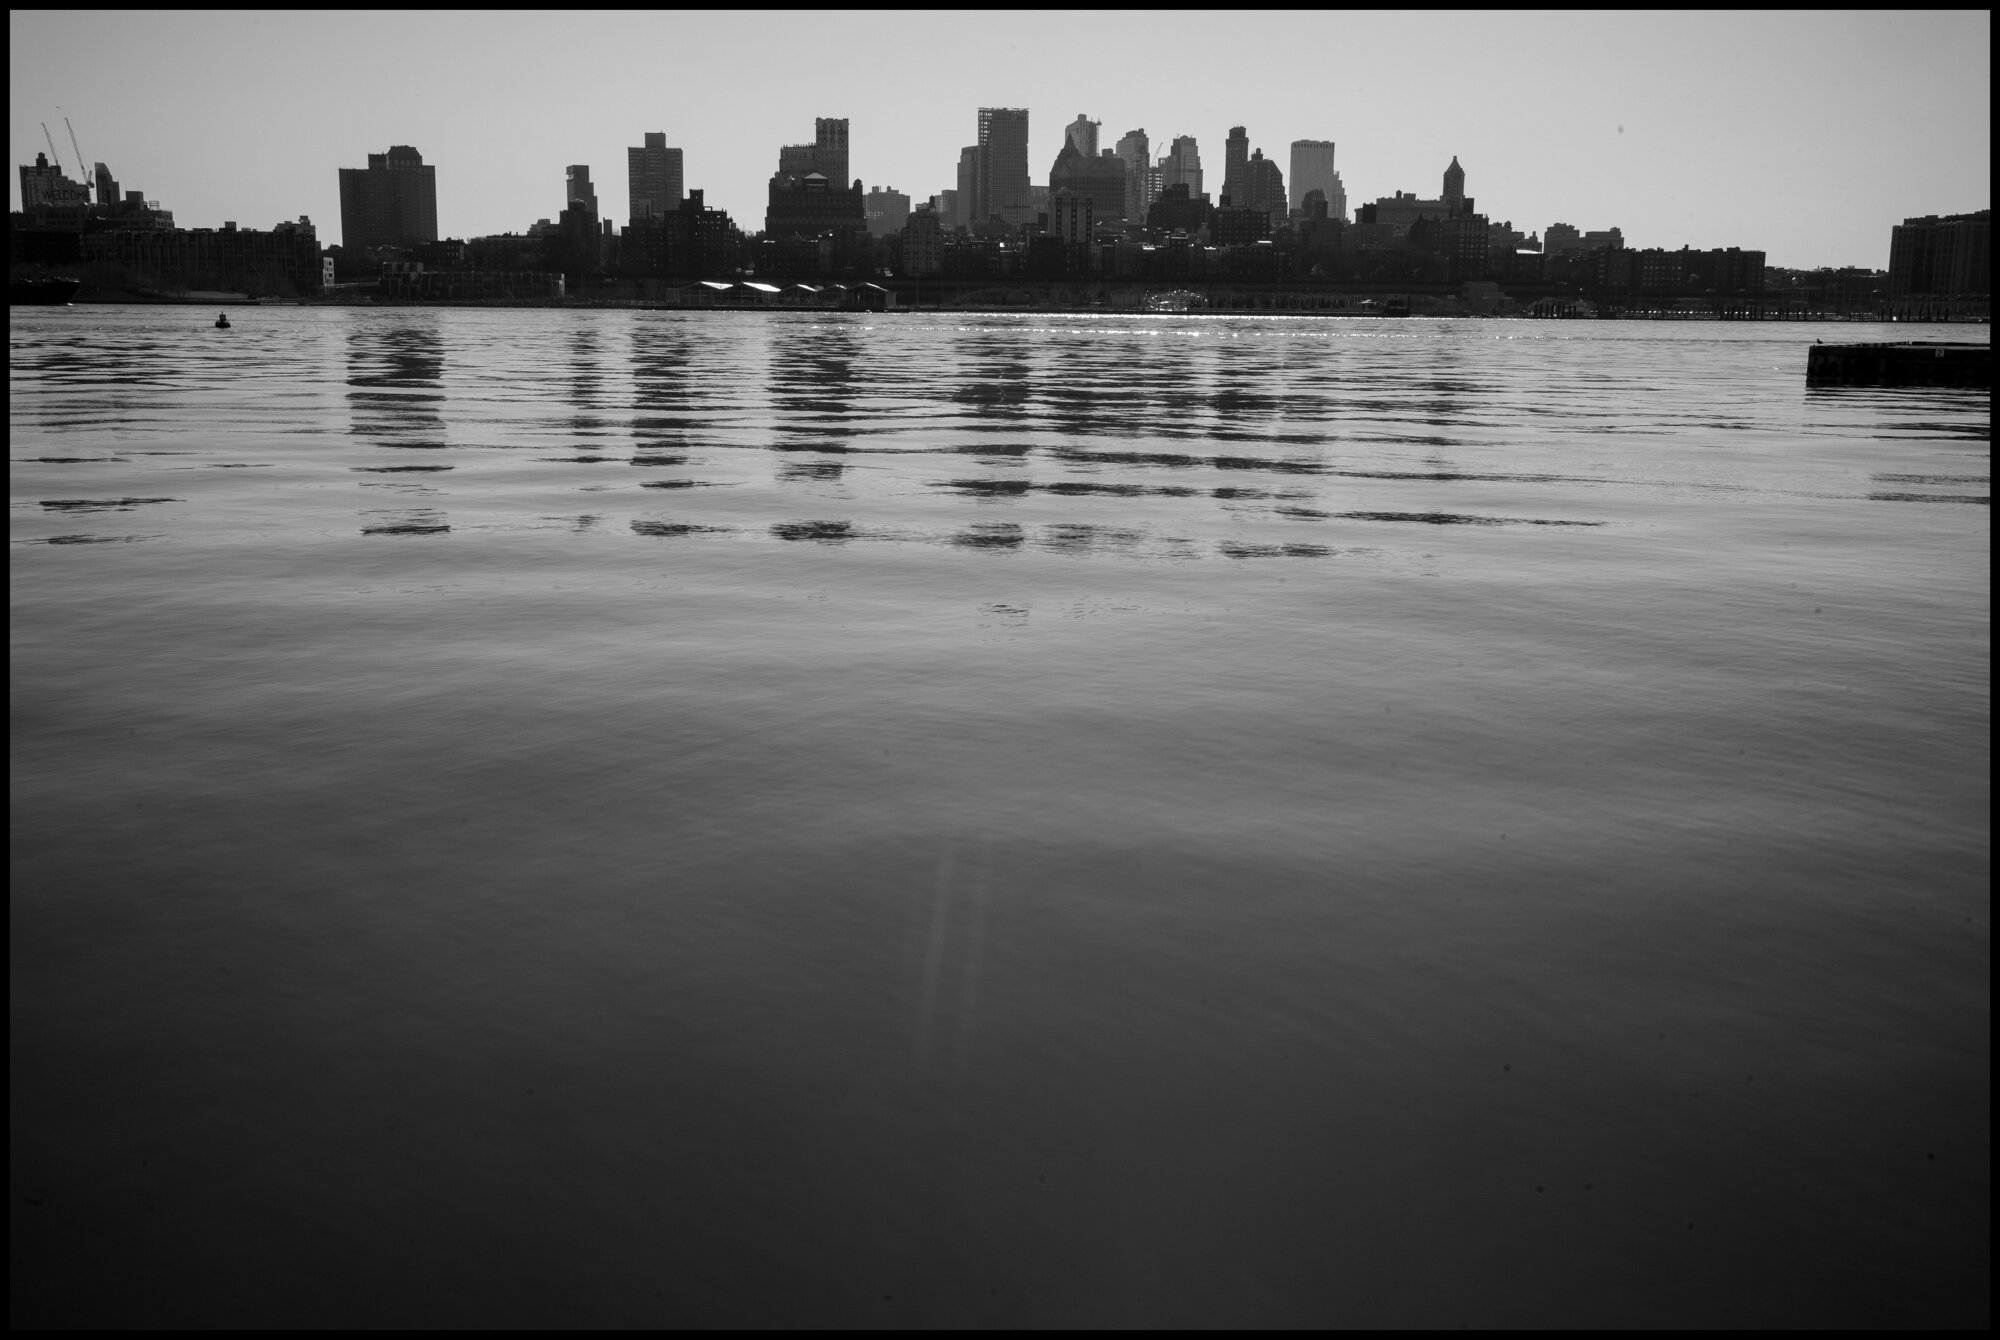  The waters of the Bay of Manhattan. We are definitely all living through a time of very troubled waters, and yet there are days, when smooth calm light can help the heart for the journey ahead.  March 26, 2020 ©Peter Turnley  ID# 04-019 